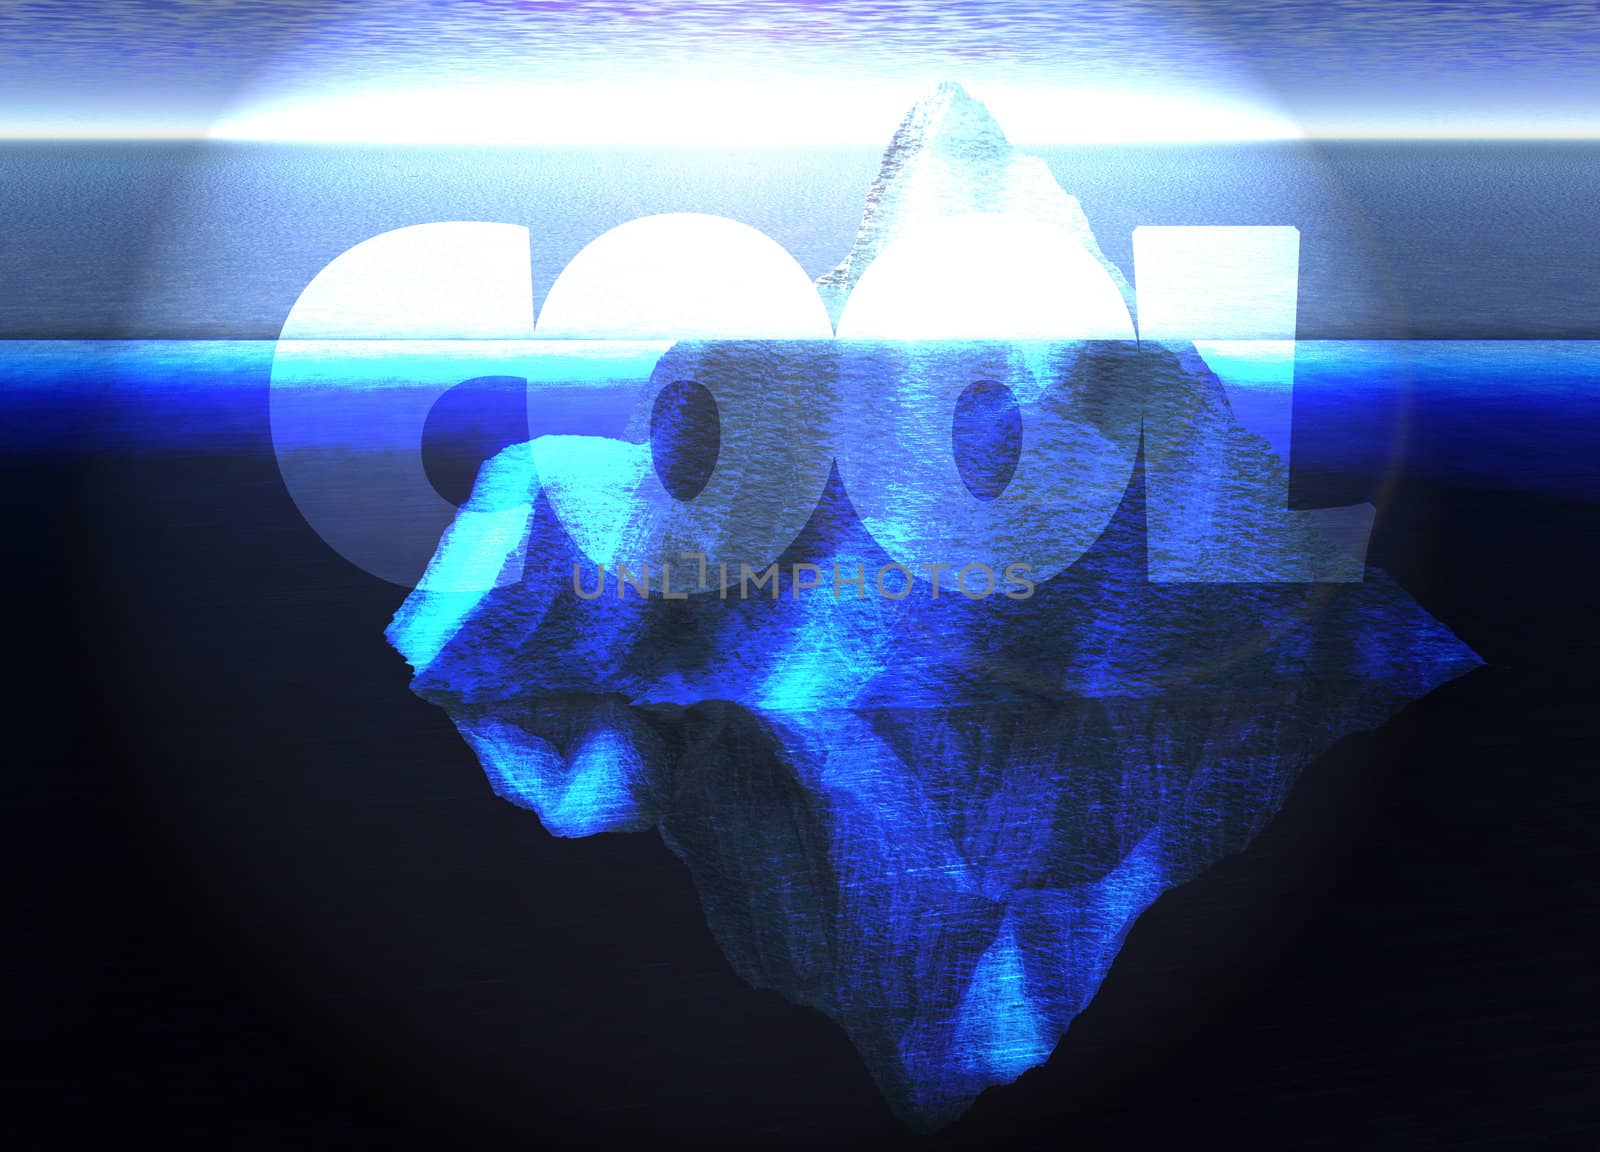 Floating Iceberg in the Open Ocean with Cool Text by bobbigmac